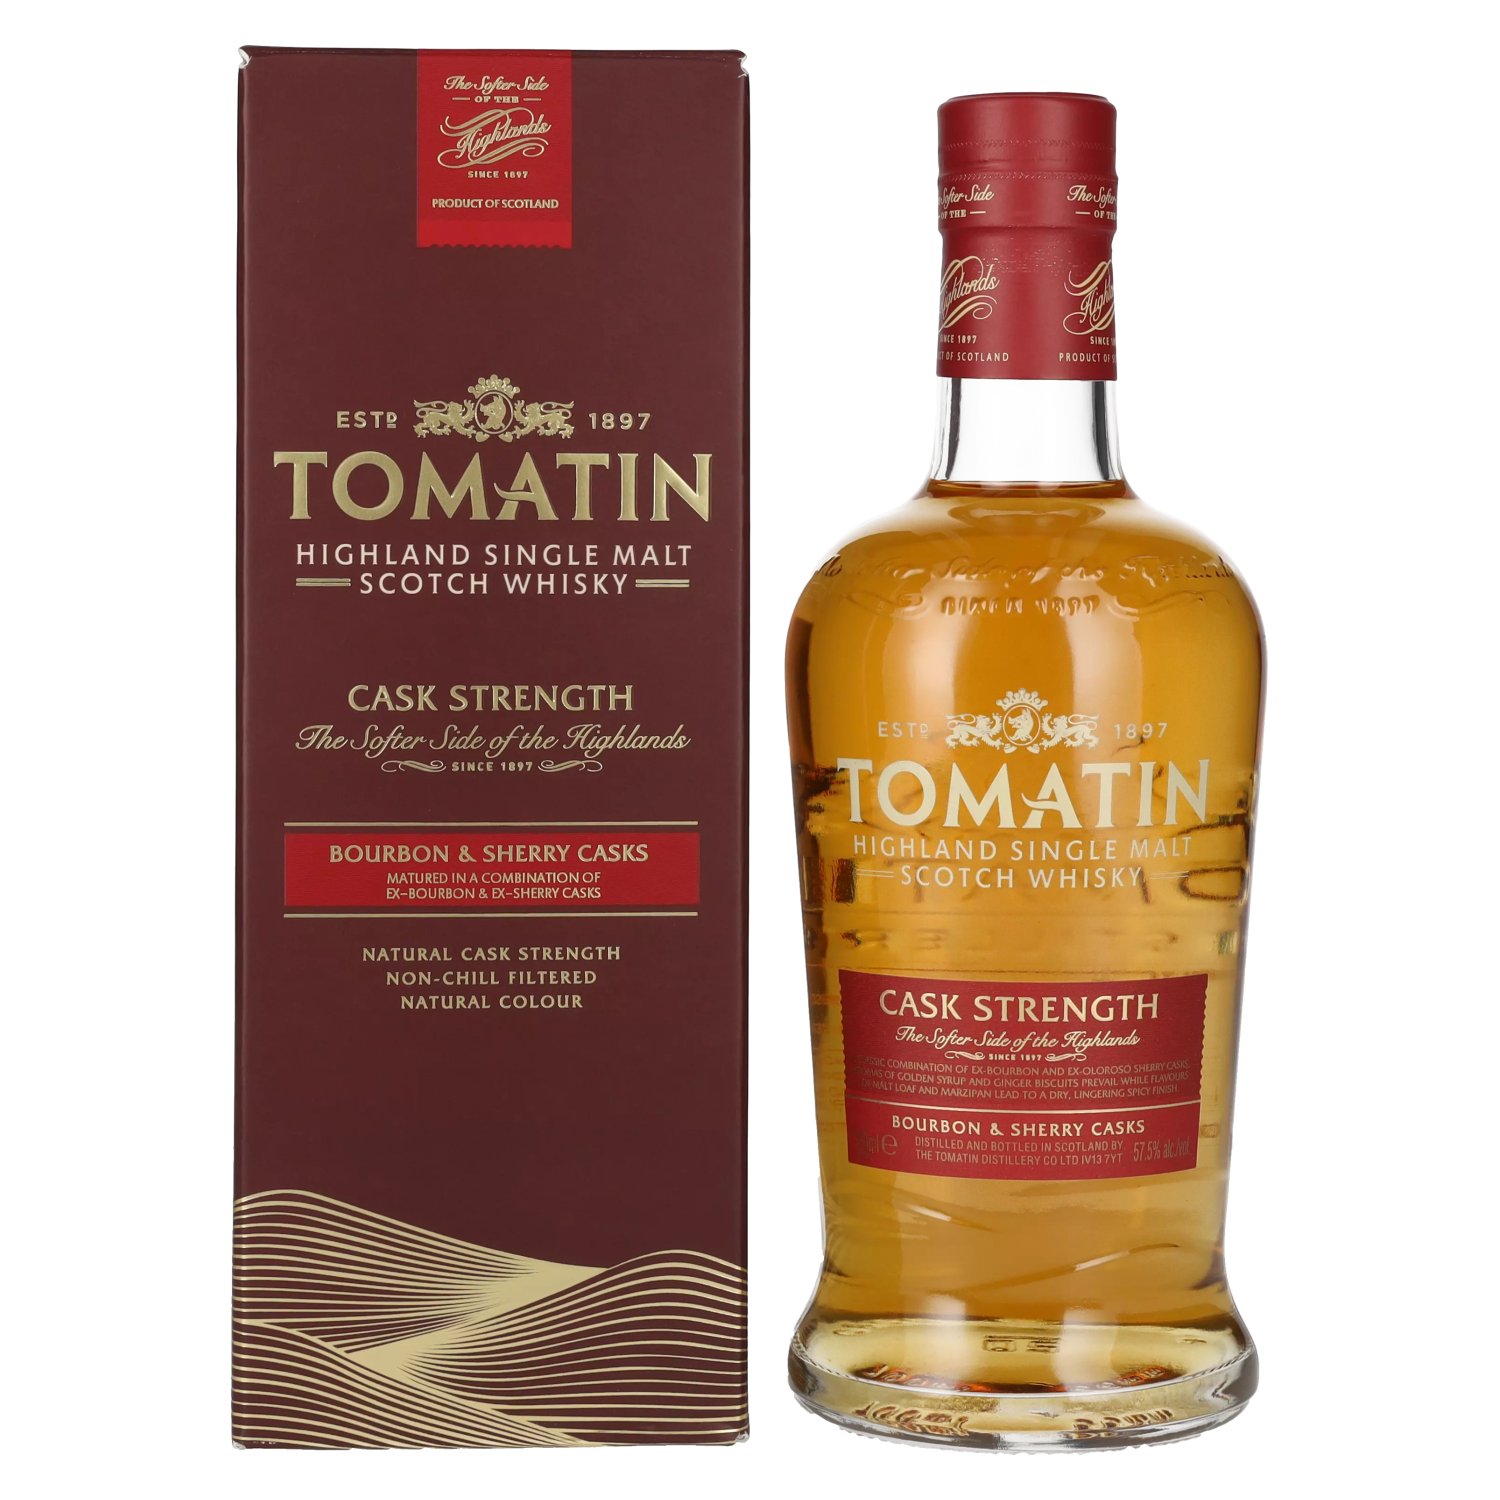 Tomatin Cask Strength Edition 57,5% Vol. 0,7l in Geschenkbox | Whisky